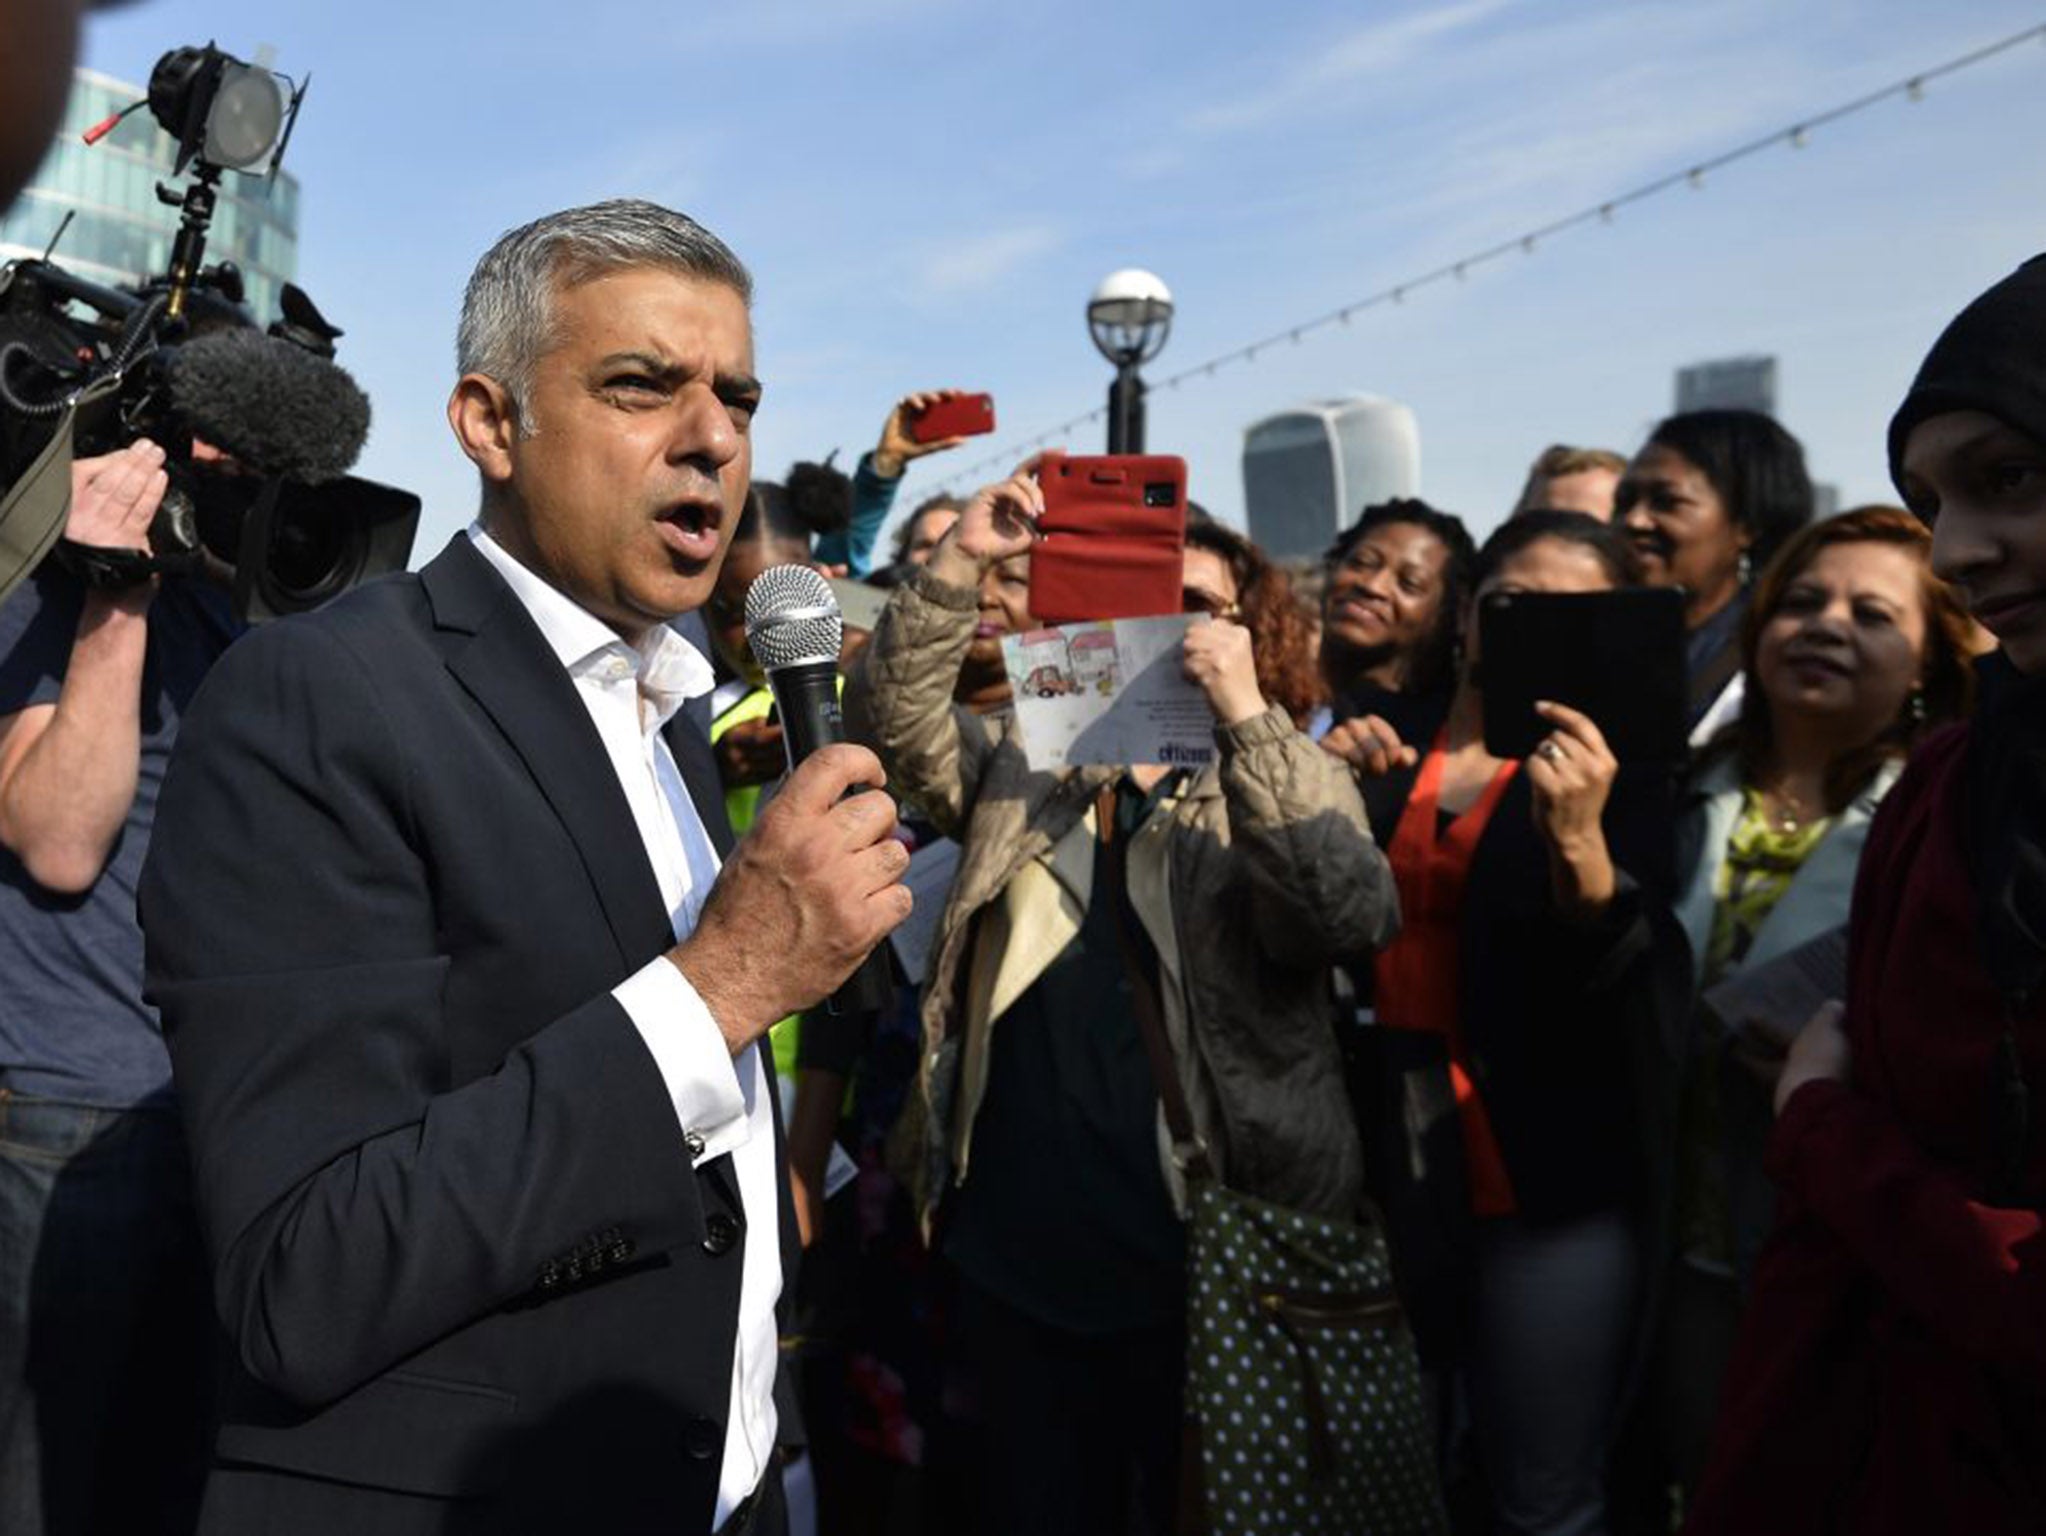 Sadiq Khan's election as London Mayor was Labour's most significant victory under Jeremy Corbyn's leadership